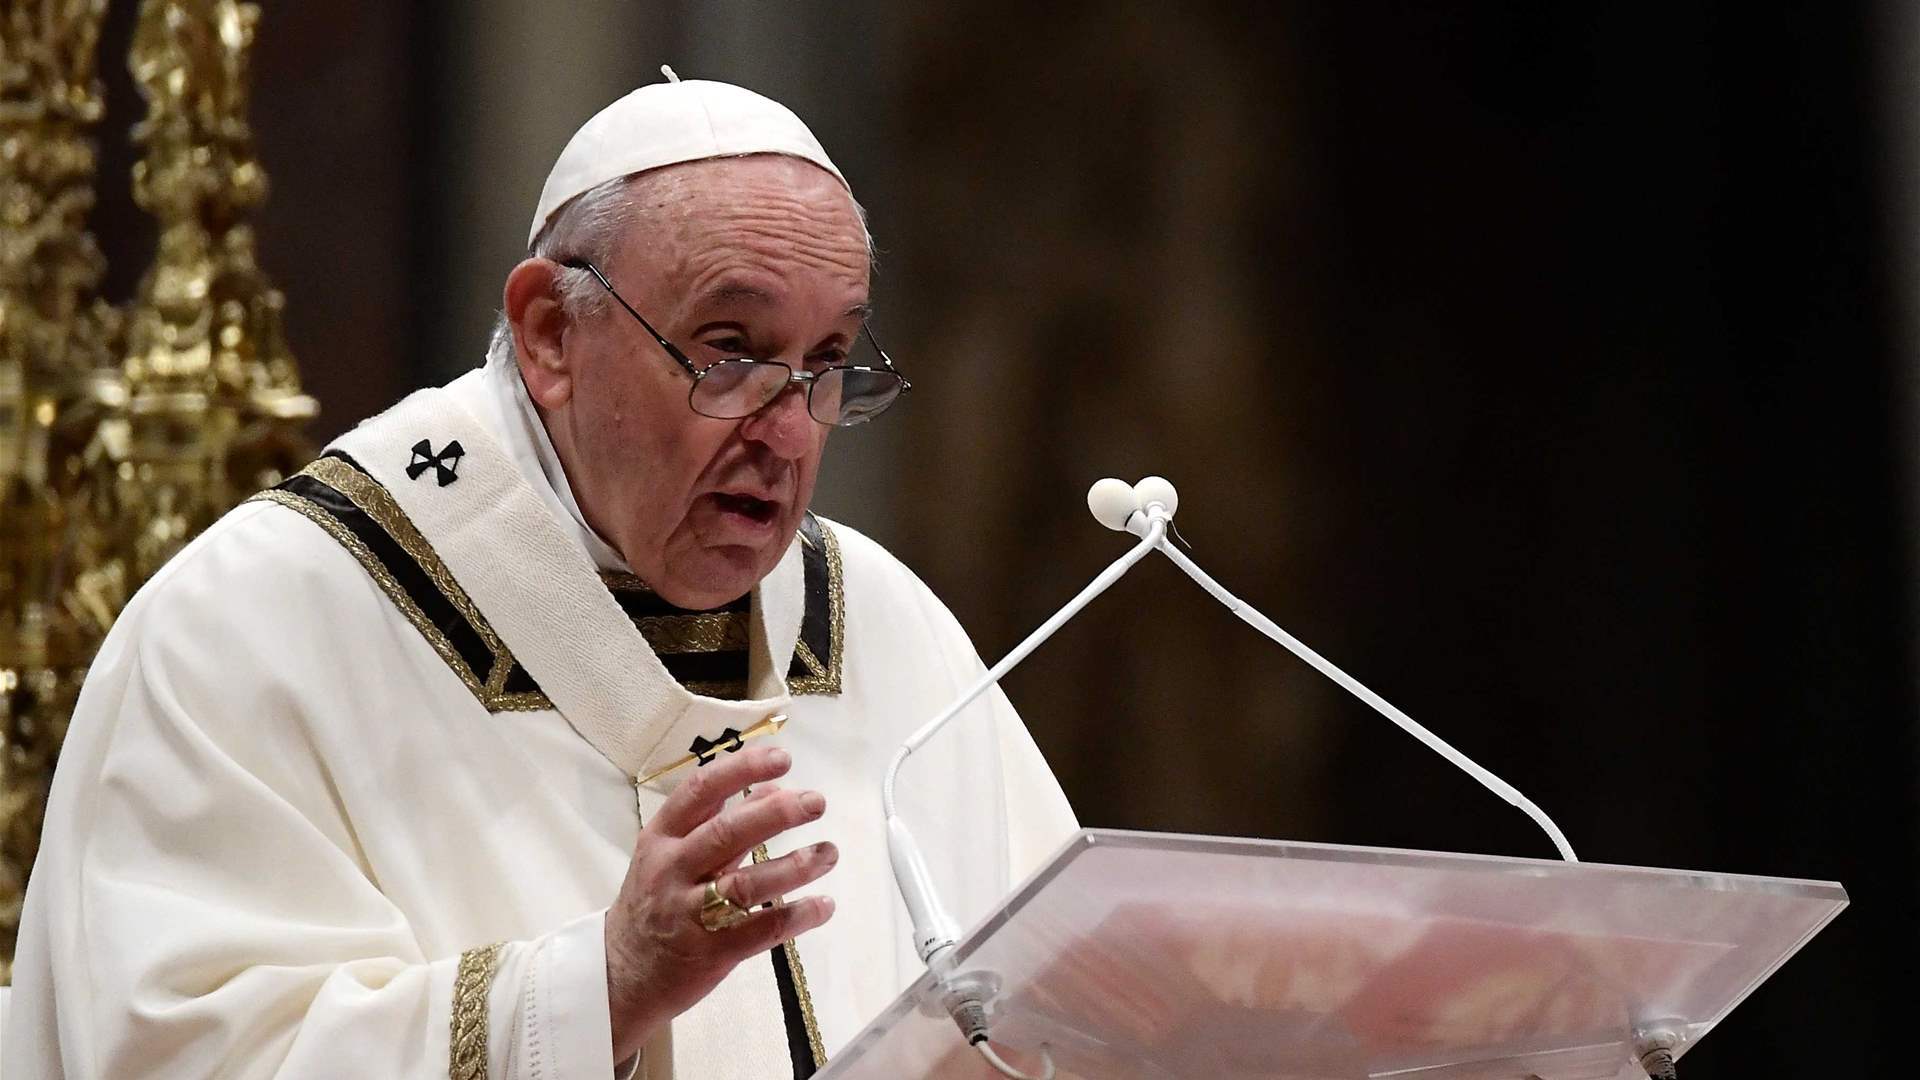 Pope Francis cancels Saturday meetings due to mild flu